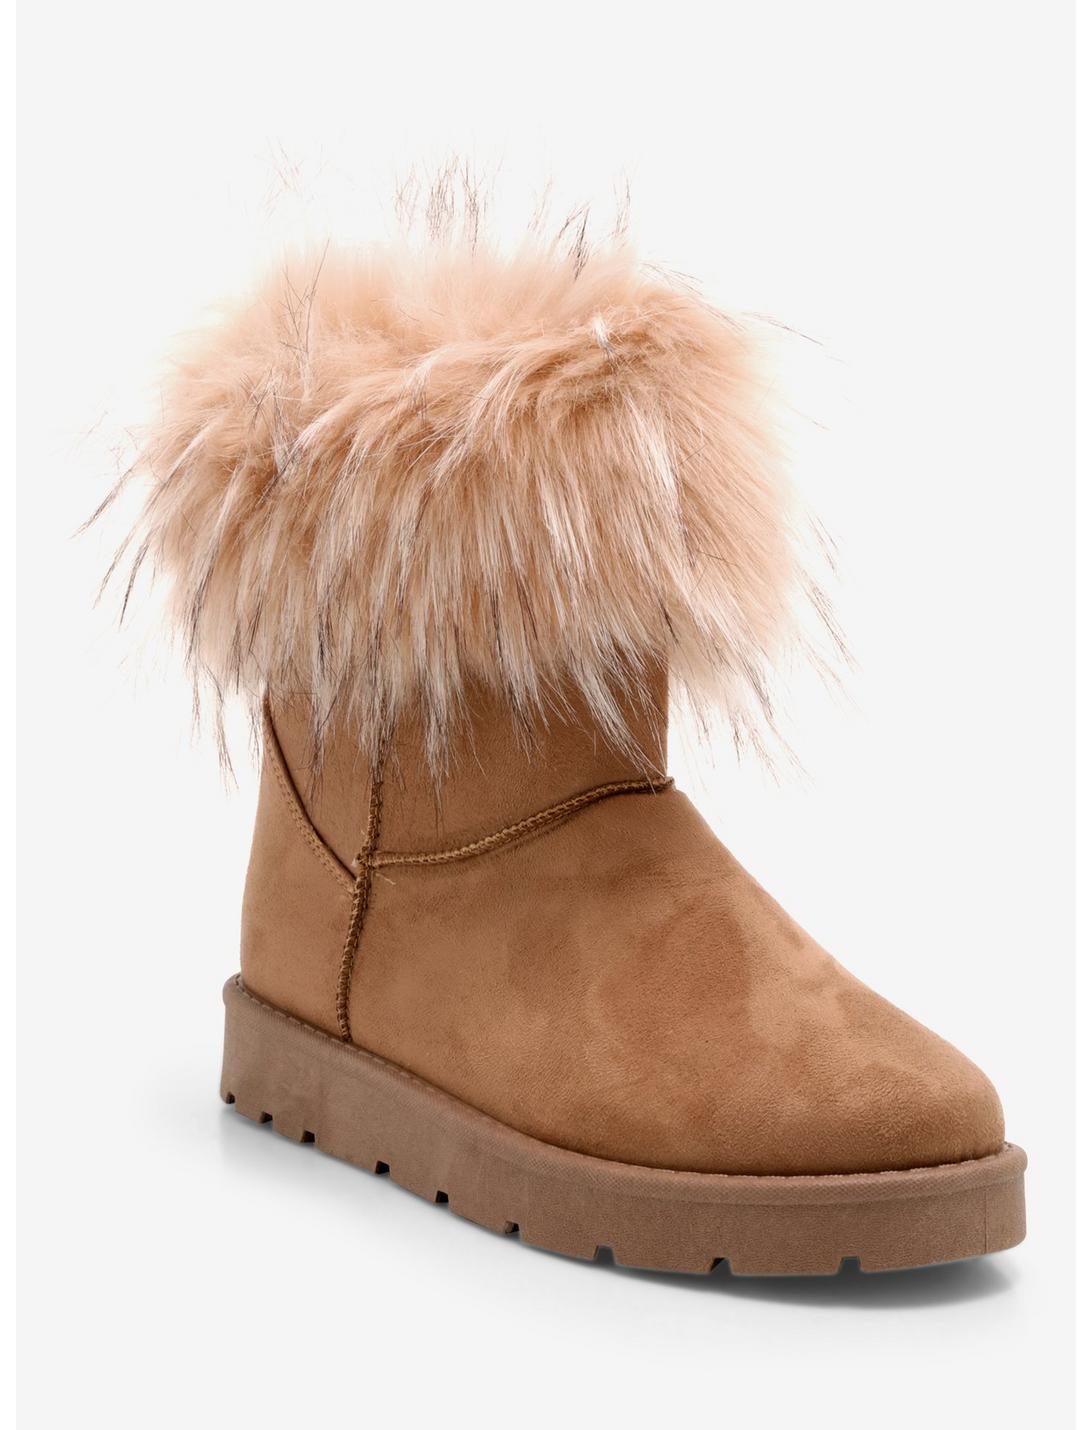 Dirty Laundry Brown Faux Fur Lined Boots, MULTI, hi-res